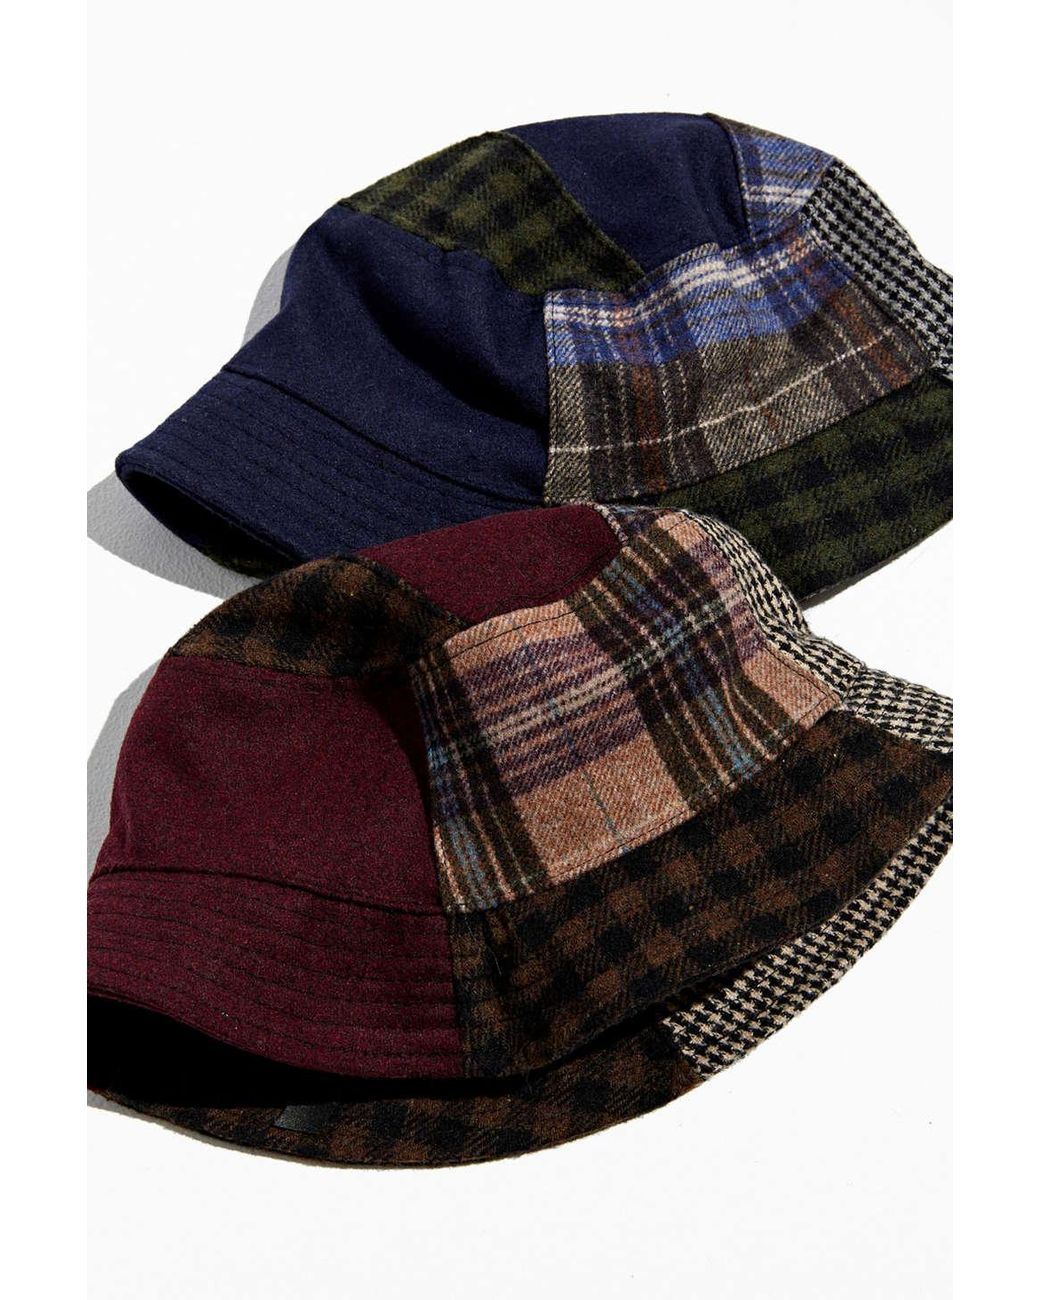 Urban Outfitters Uo Patchwork Menswear Bucket Hat for Men | Lyst